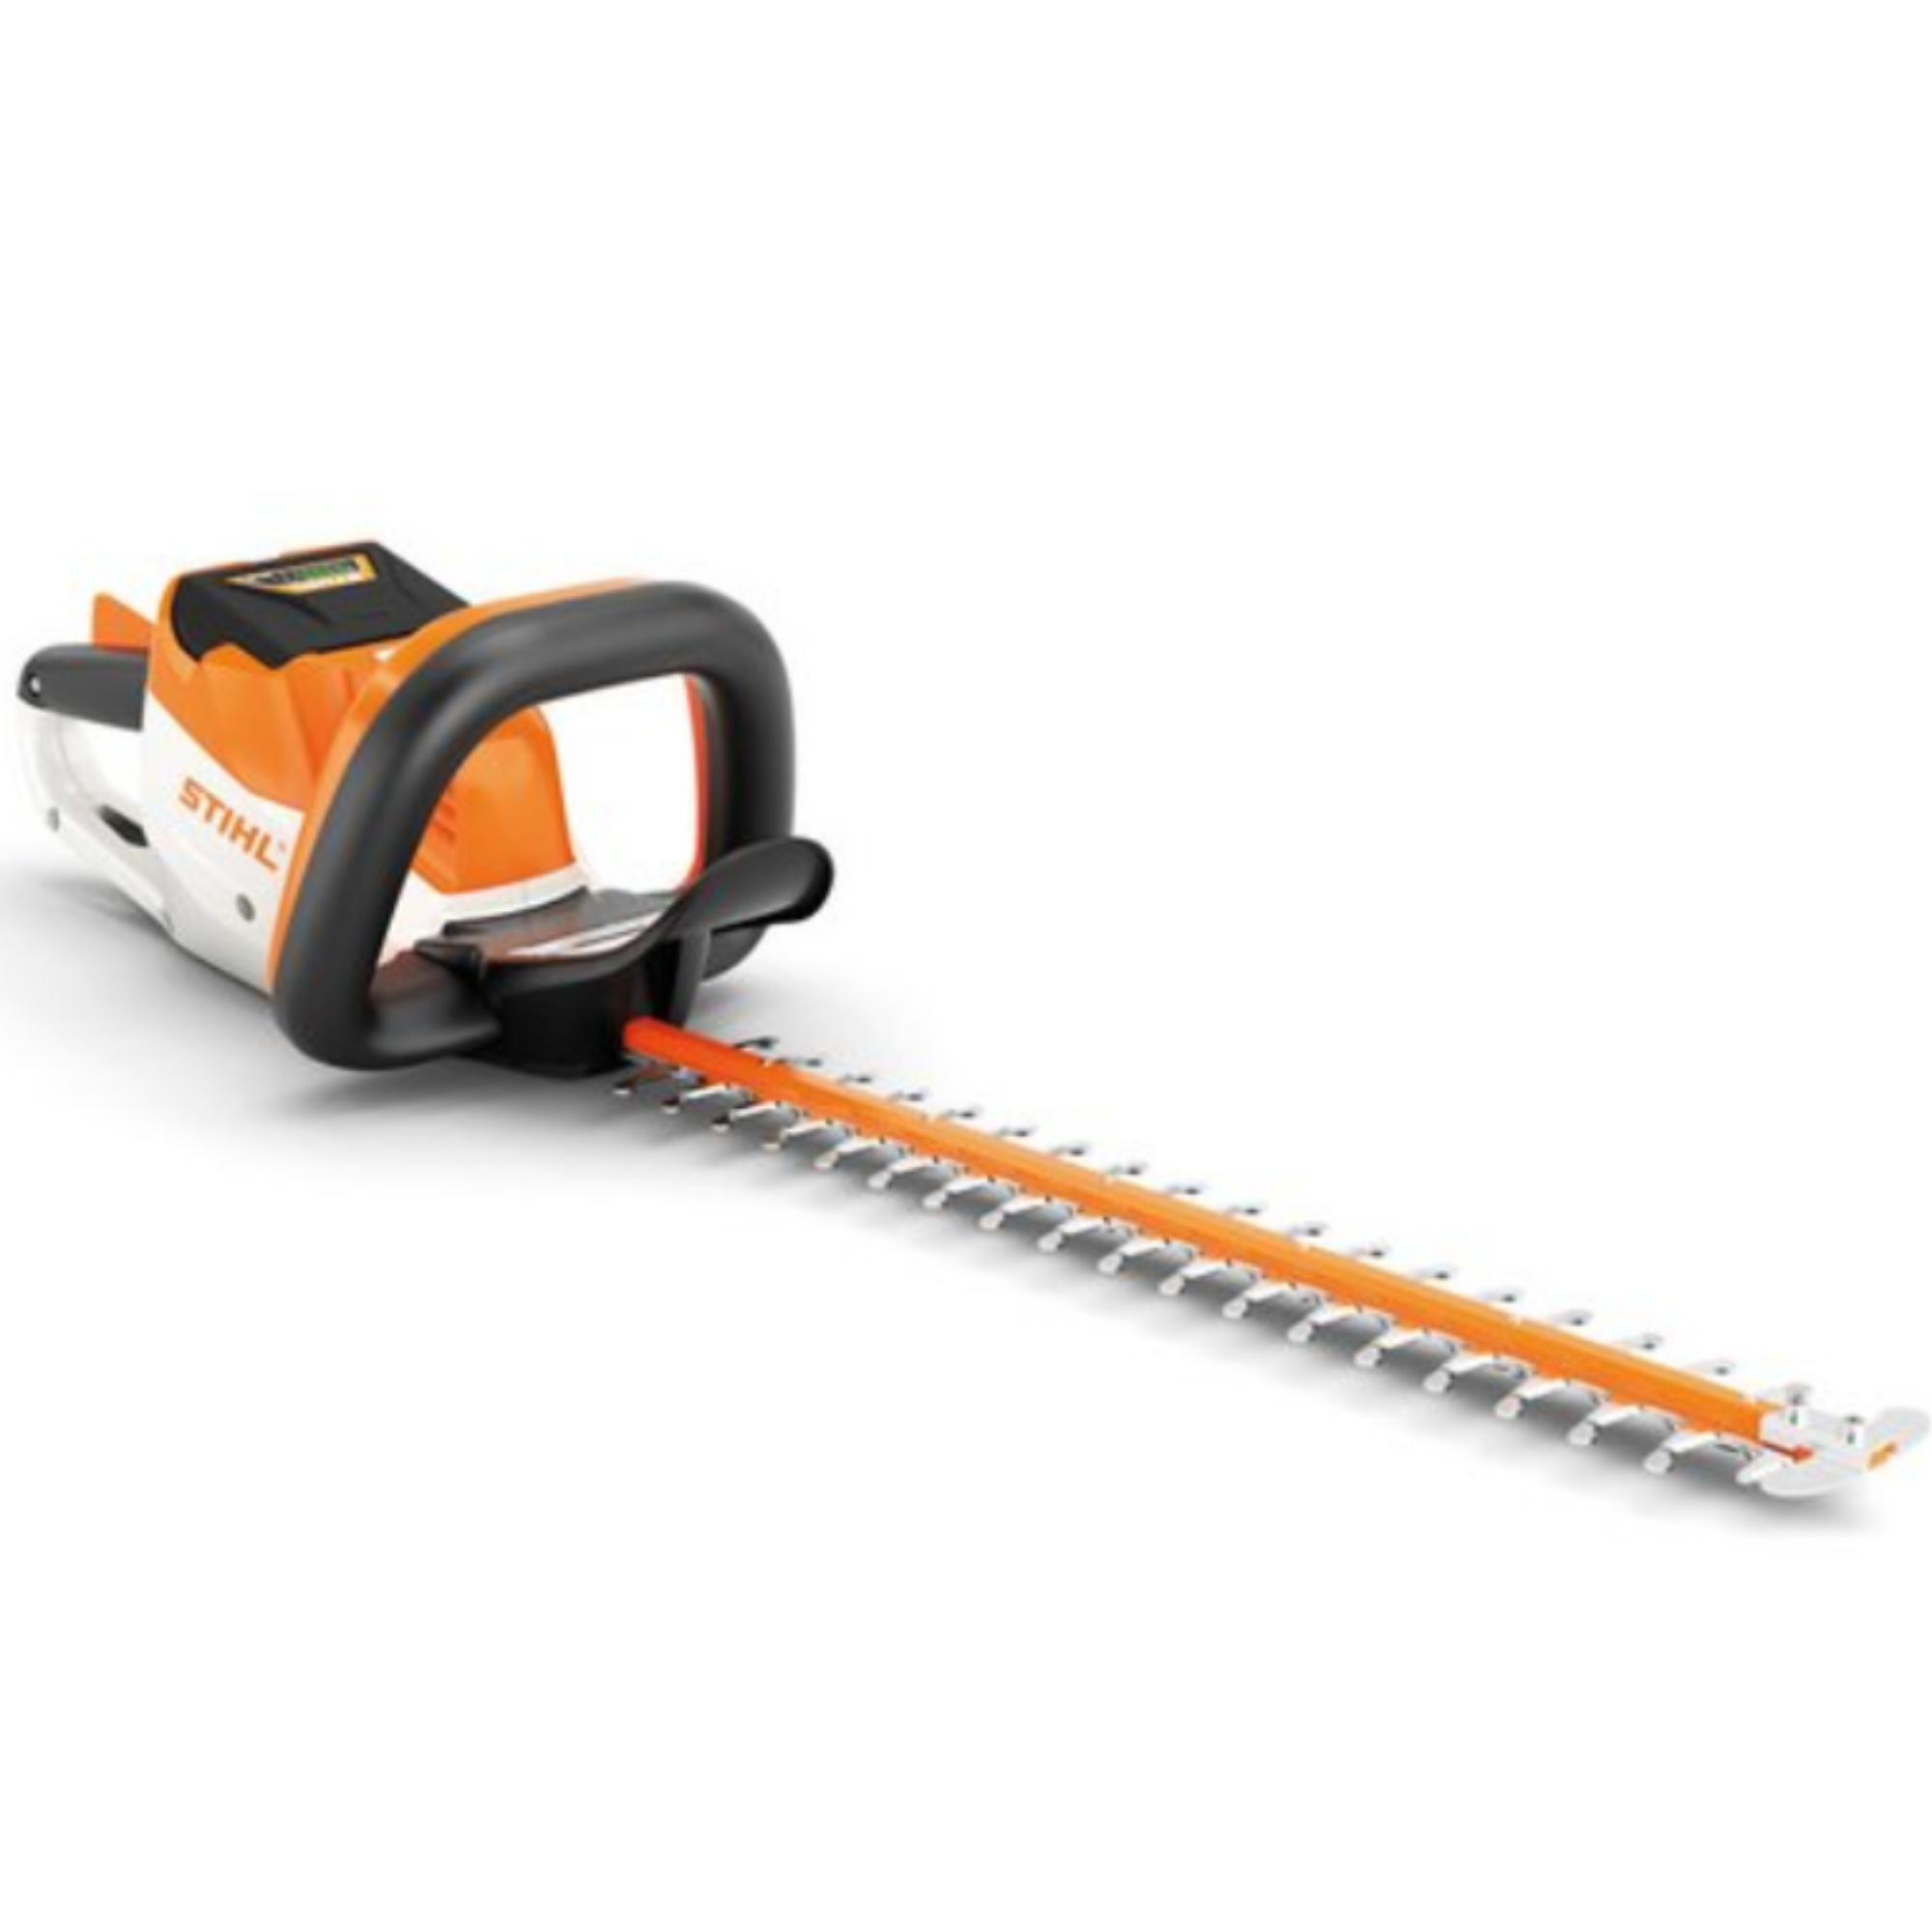 Stihl HSA 56  Battery Powered Hedge Trimmer - Tool Only